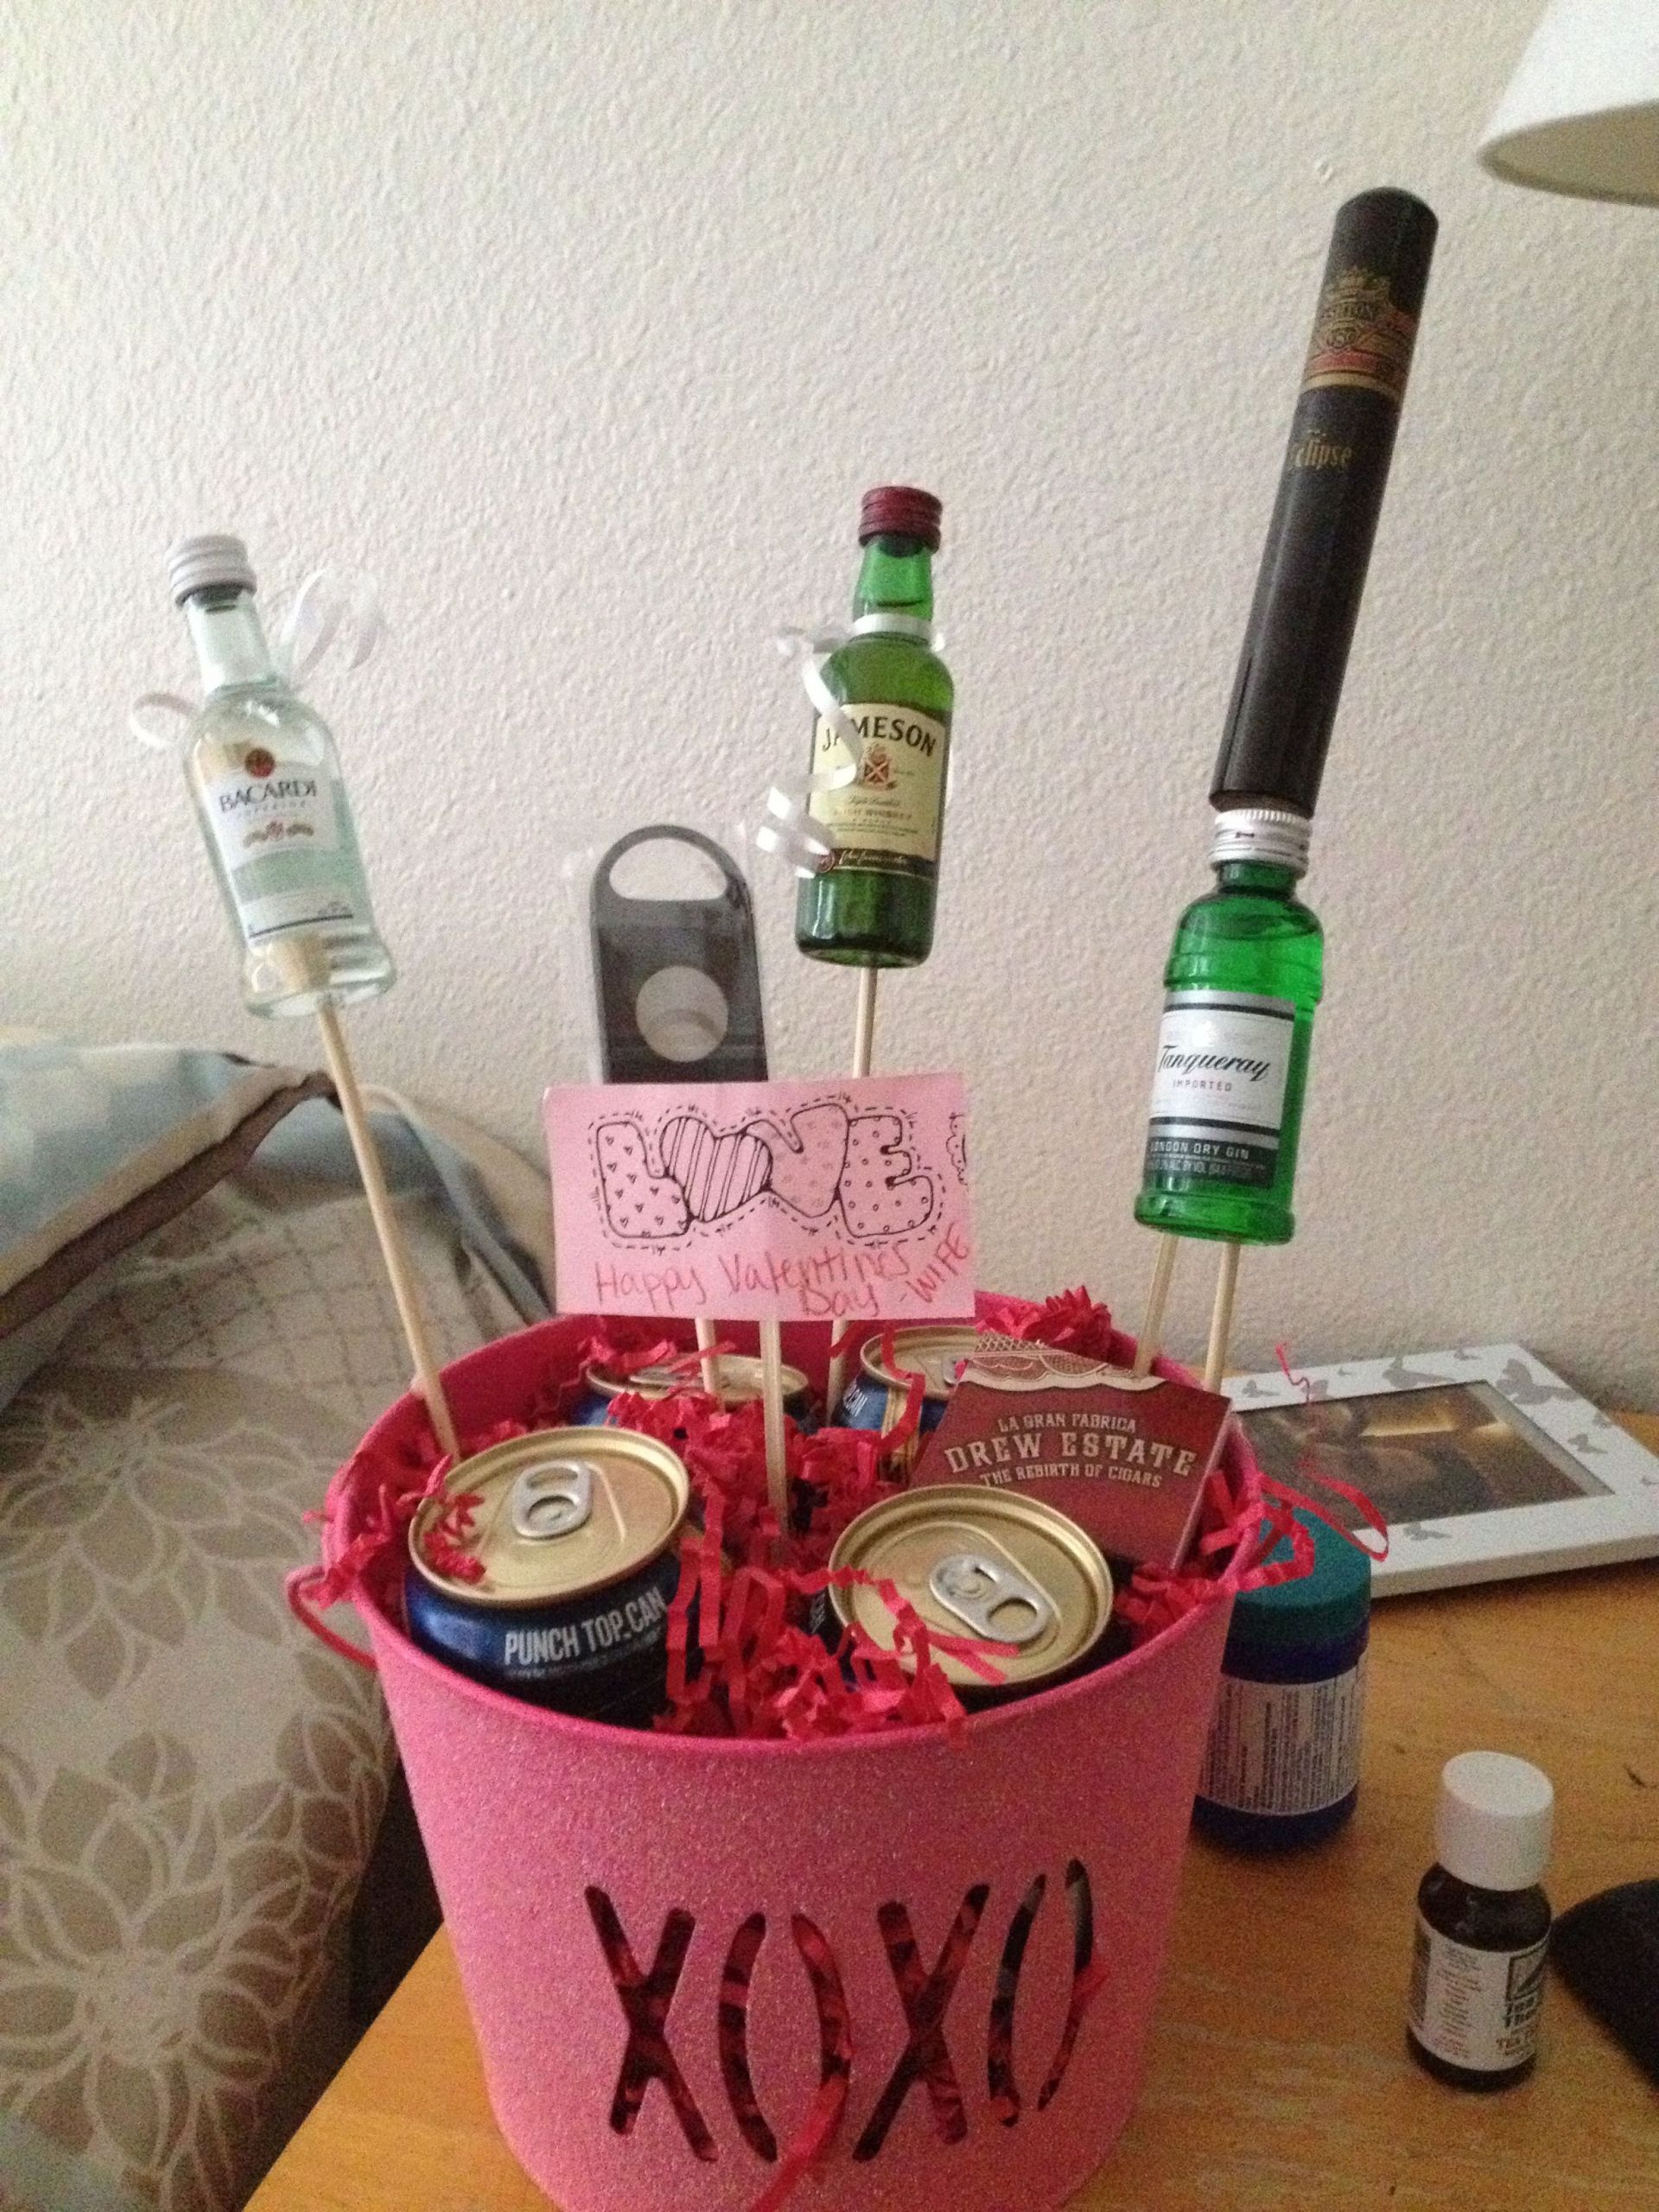 Valentines Day Gift Ideas For My Husband
 I would do this in Christmas a theme t for husband